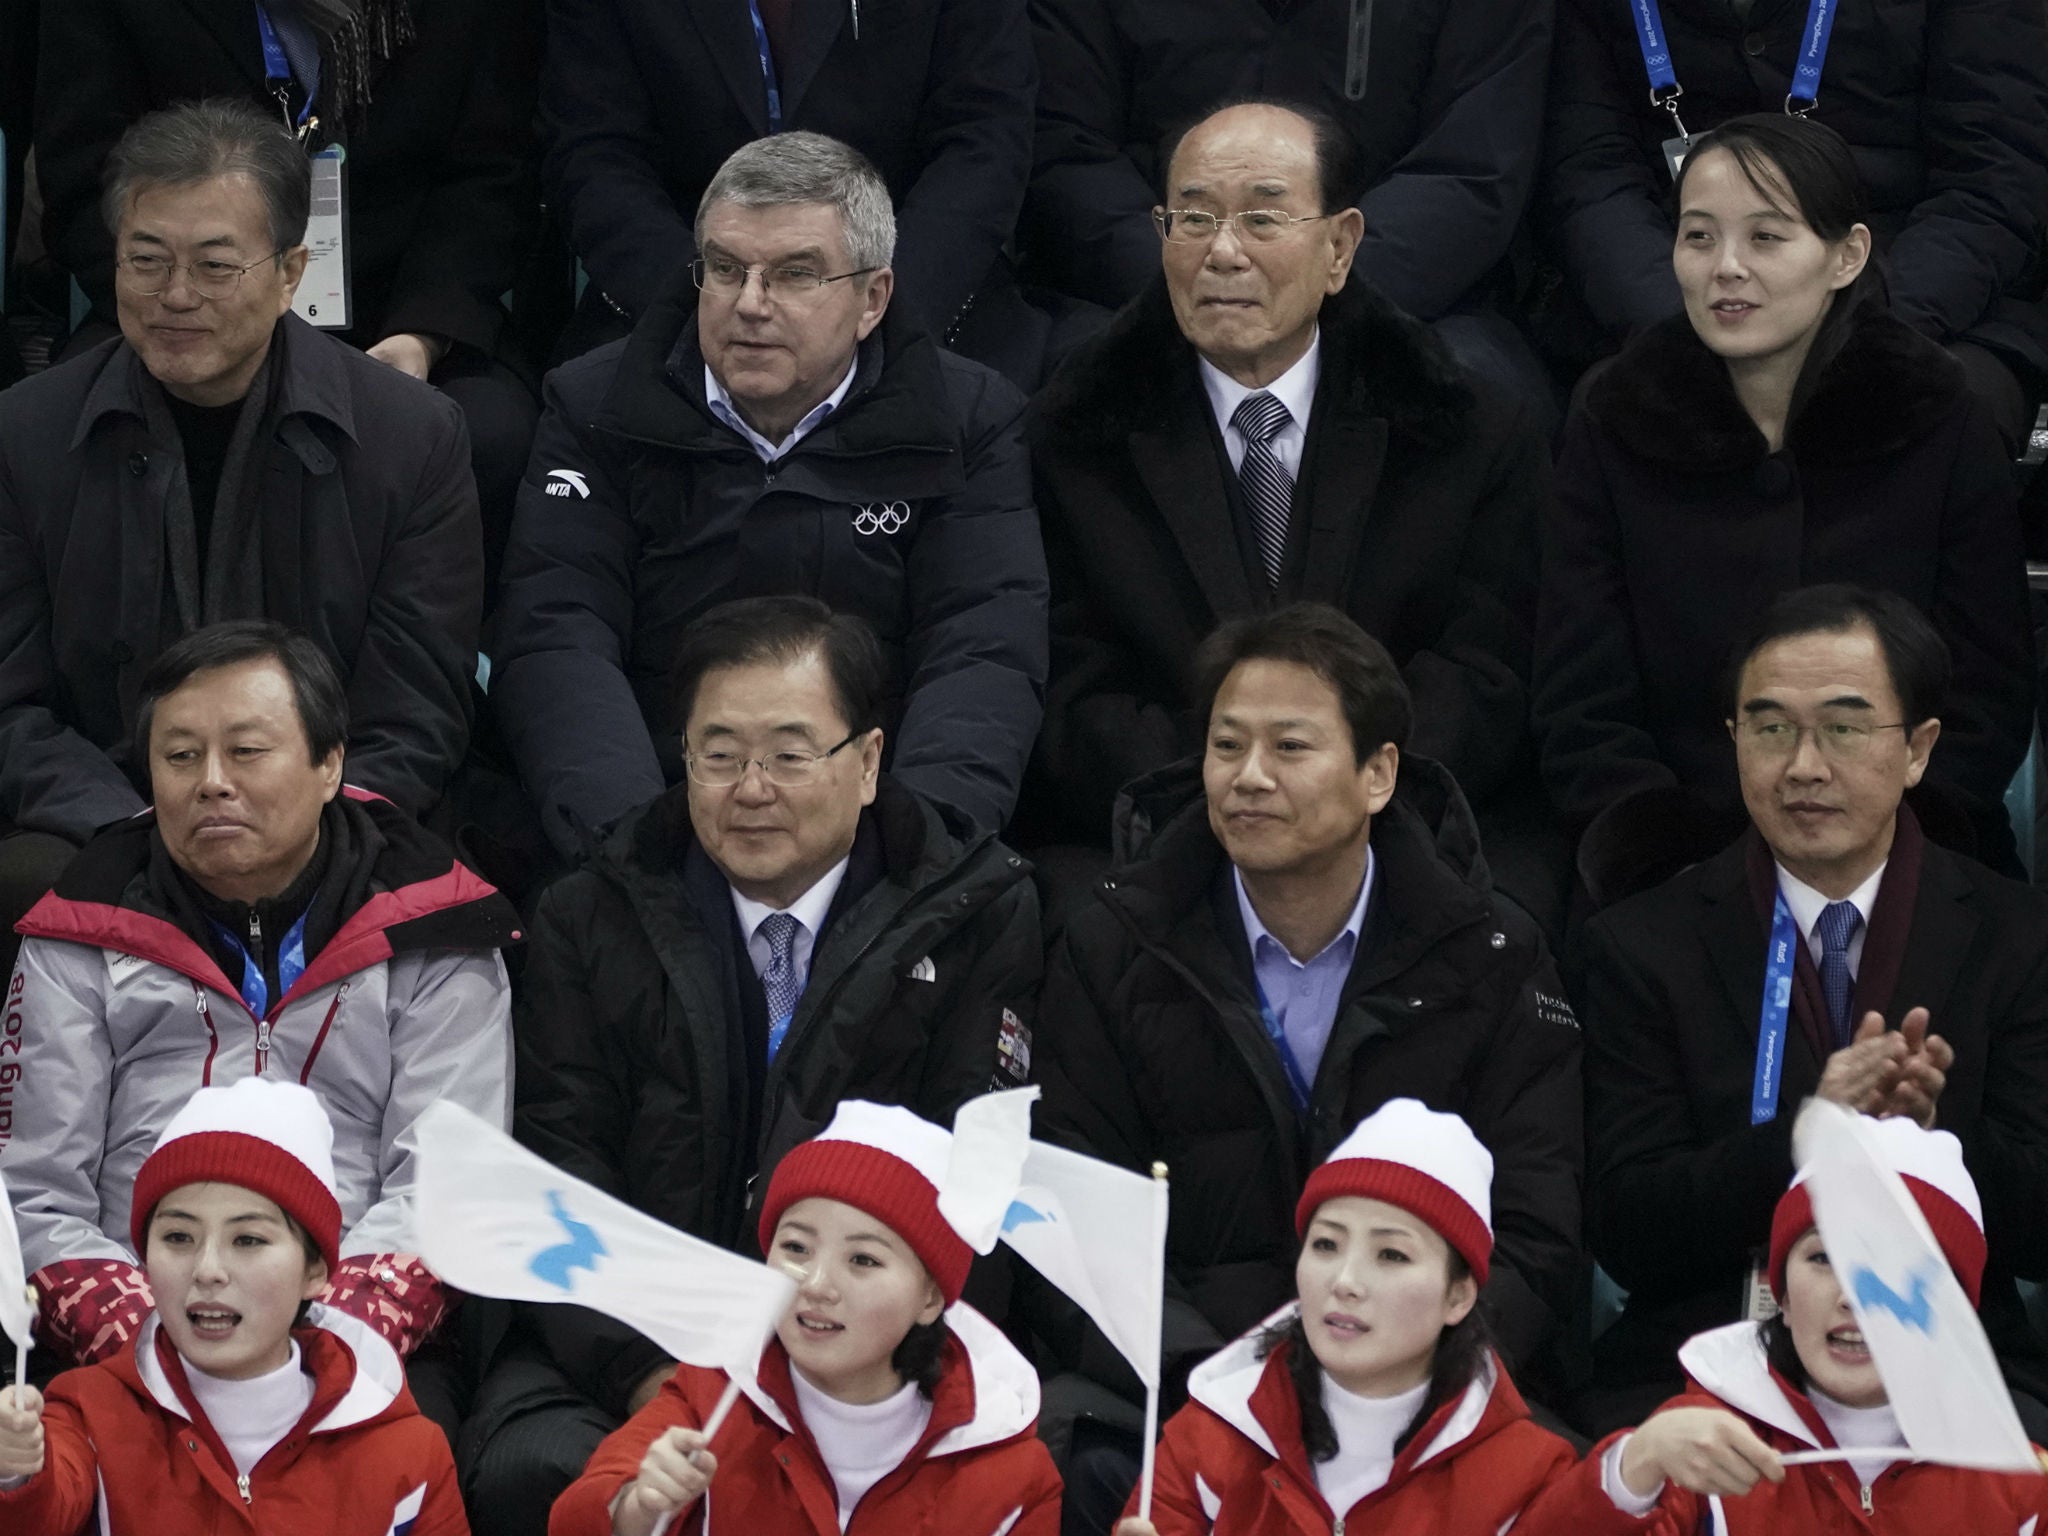 Kim Yo-jong, sister of North Korean leader Kim Jong-un, and other North Korea officials sit with Thomas Bach of the International Olympic Committee and South Korean President Moon Jae-in to watch a women's hockey game between featuring the combined Korean team